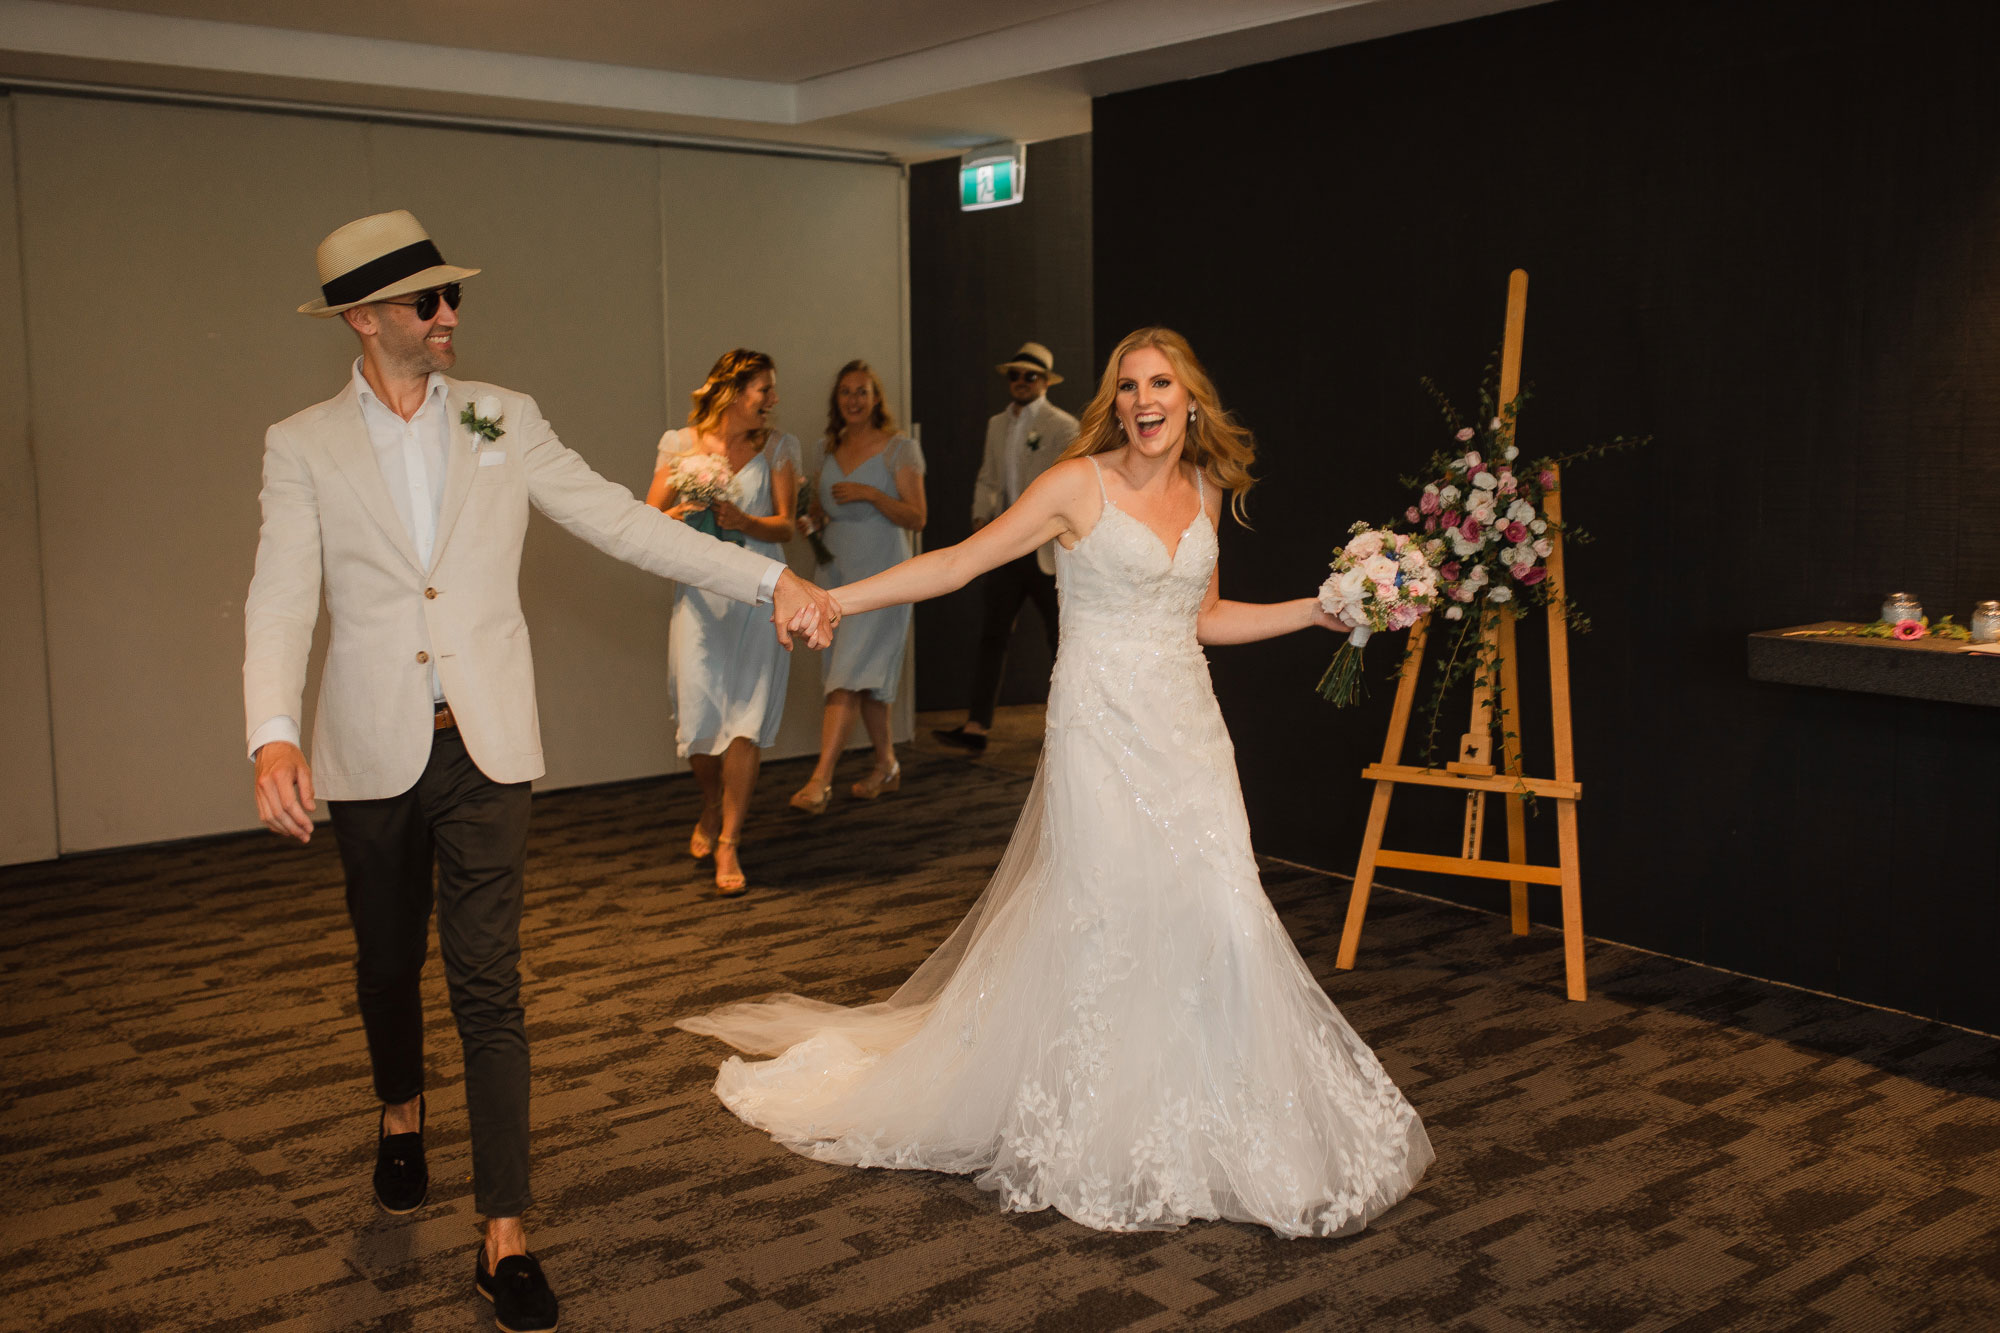 auckland bride and groom arrive at reception